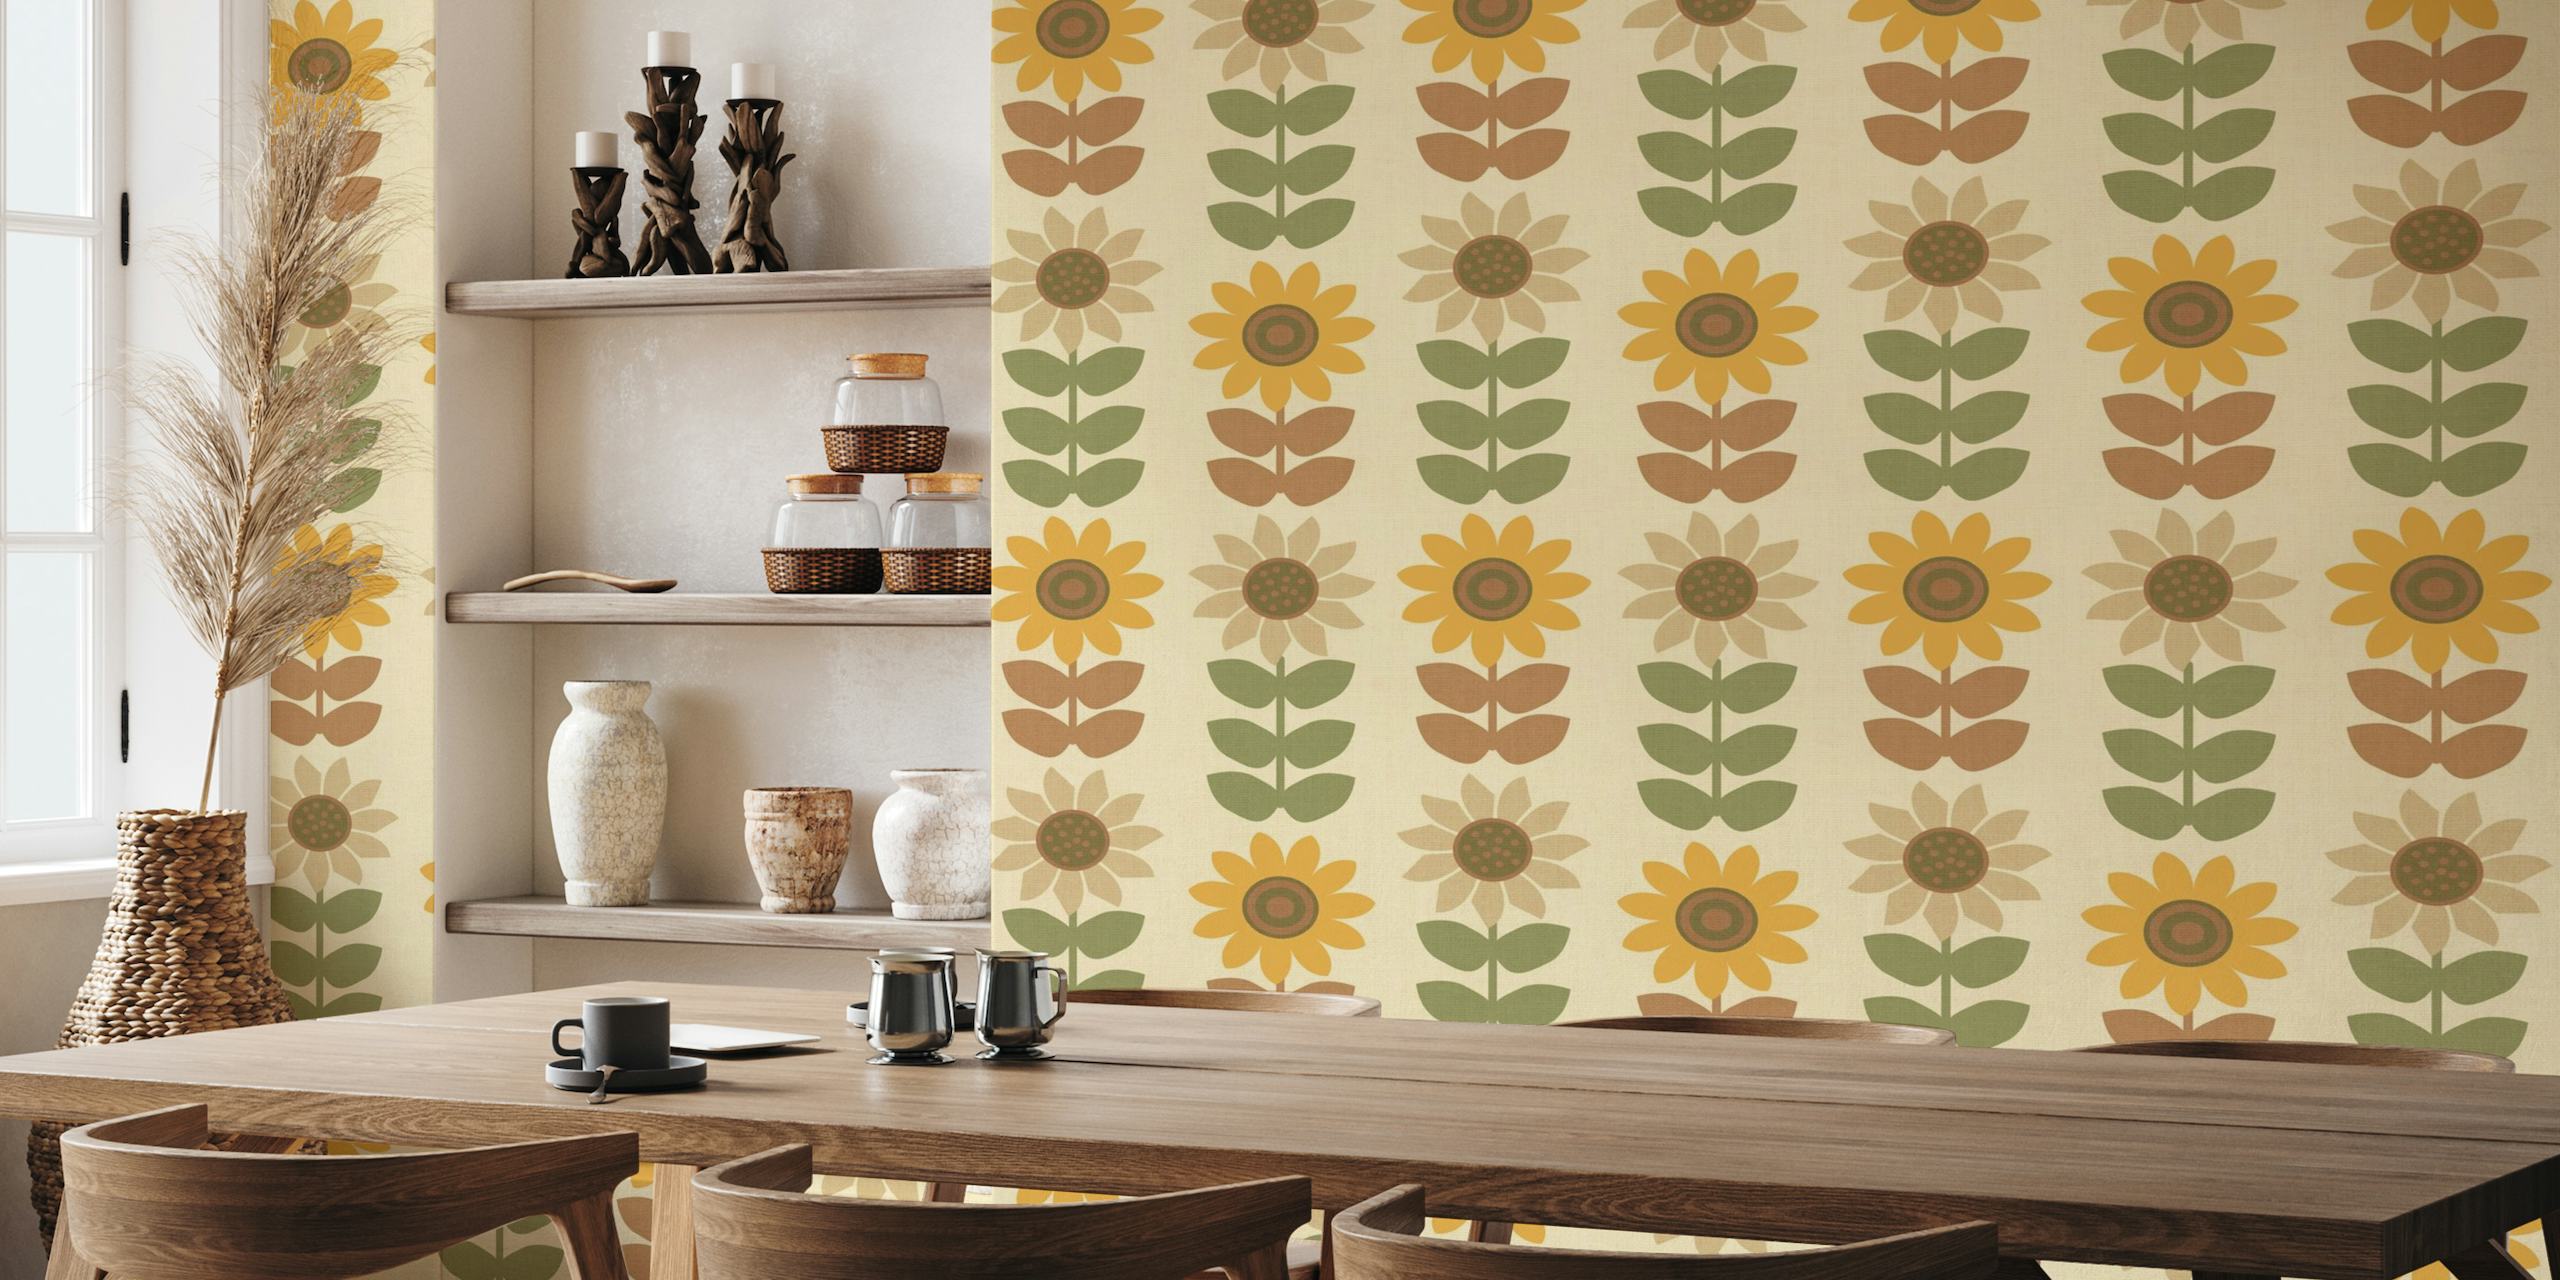 Retro-styled sunflowers in autumn colors on a wall mural